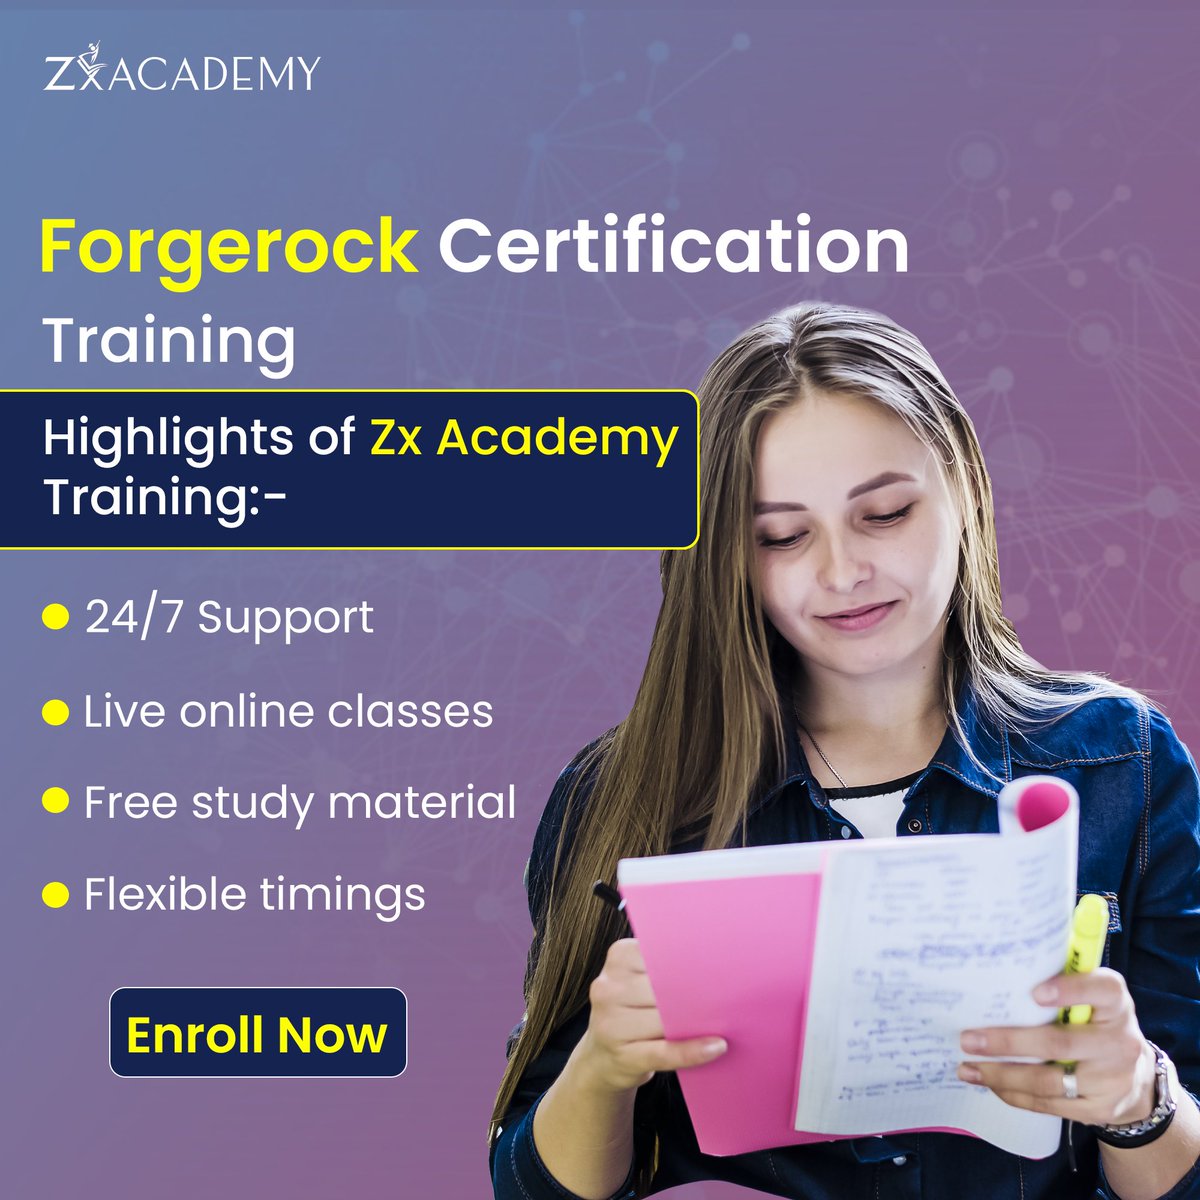 Join the ZX Academy Forgerock Training Course to Discover the Power of Identity! 📷
#Forgerockcertificationtraining #ZxAcademy #ForgerockTraining #ITSecurityTraining #APIsecurityTraining #onlinetraining #onlinecourse #onlinelearning #learn #Course #developertraining #enrollnow